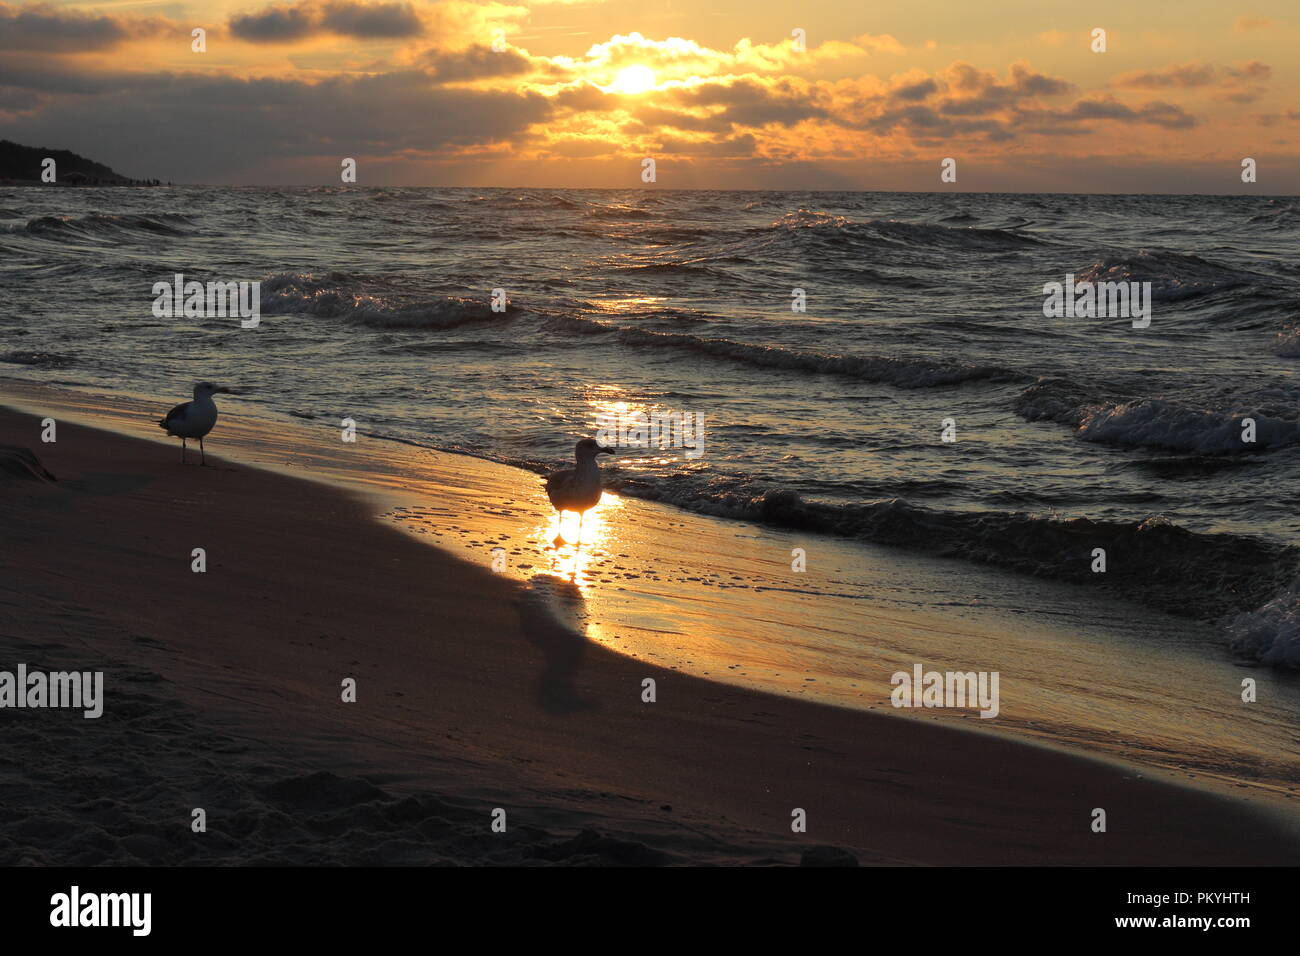 Seagulls on the beach during the sunset over the Baltic sea in September, end of summer season Stock Photo